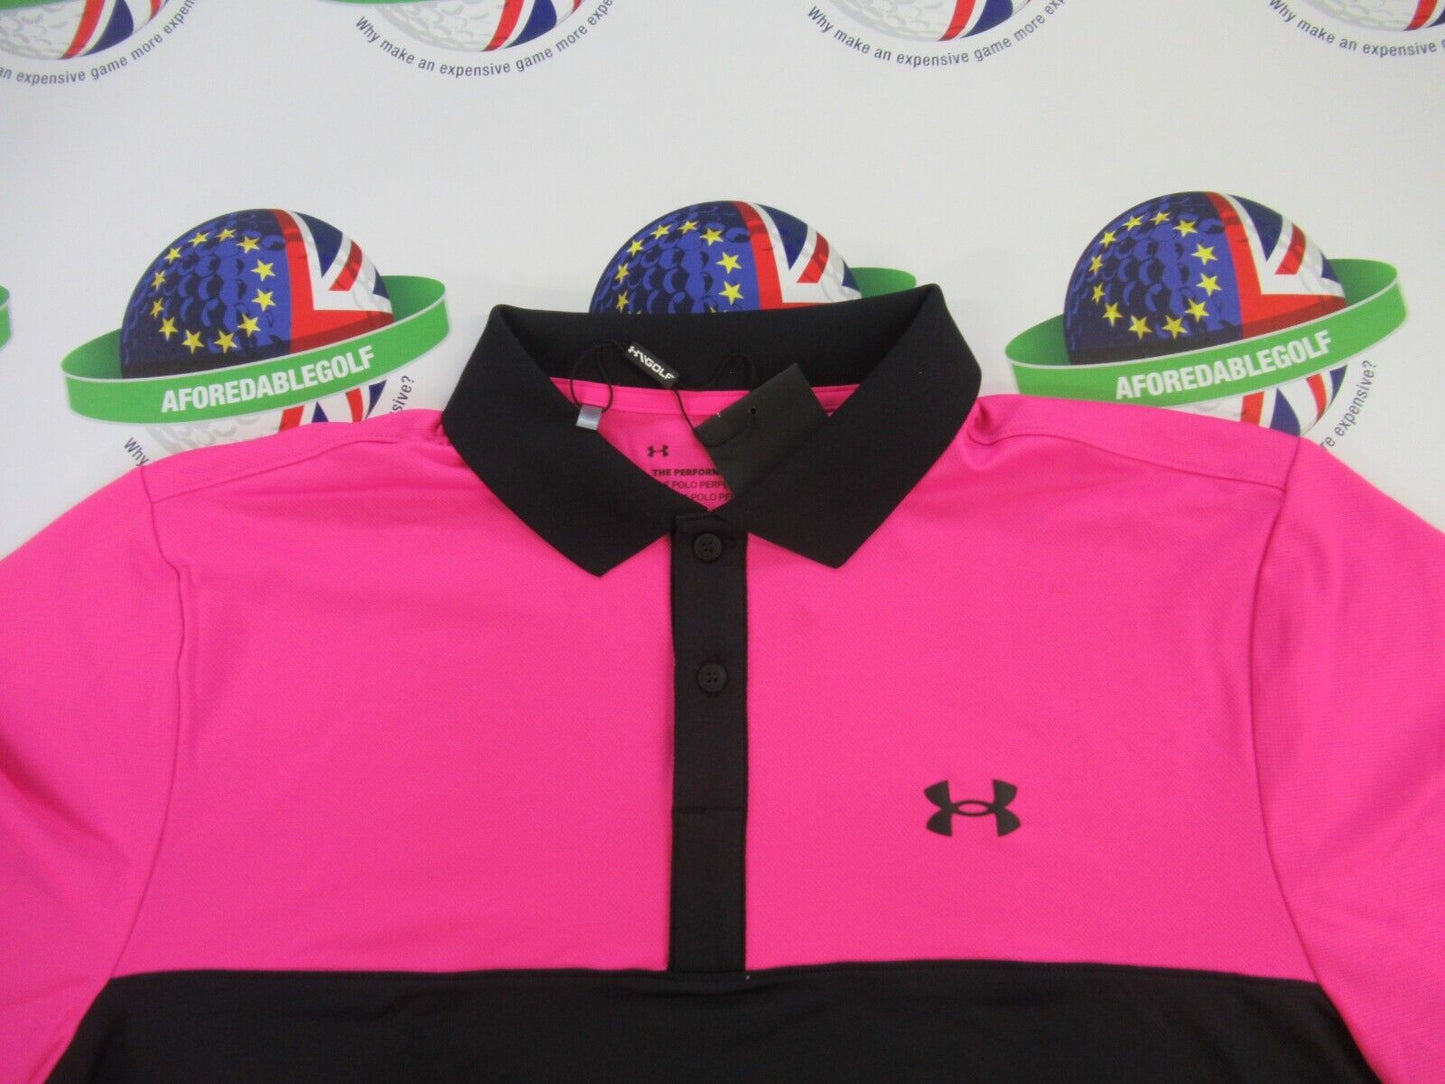 under armour the performance polo 3.0 colour block black/pink uk size large